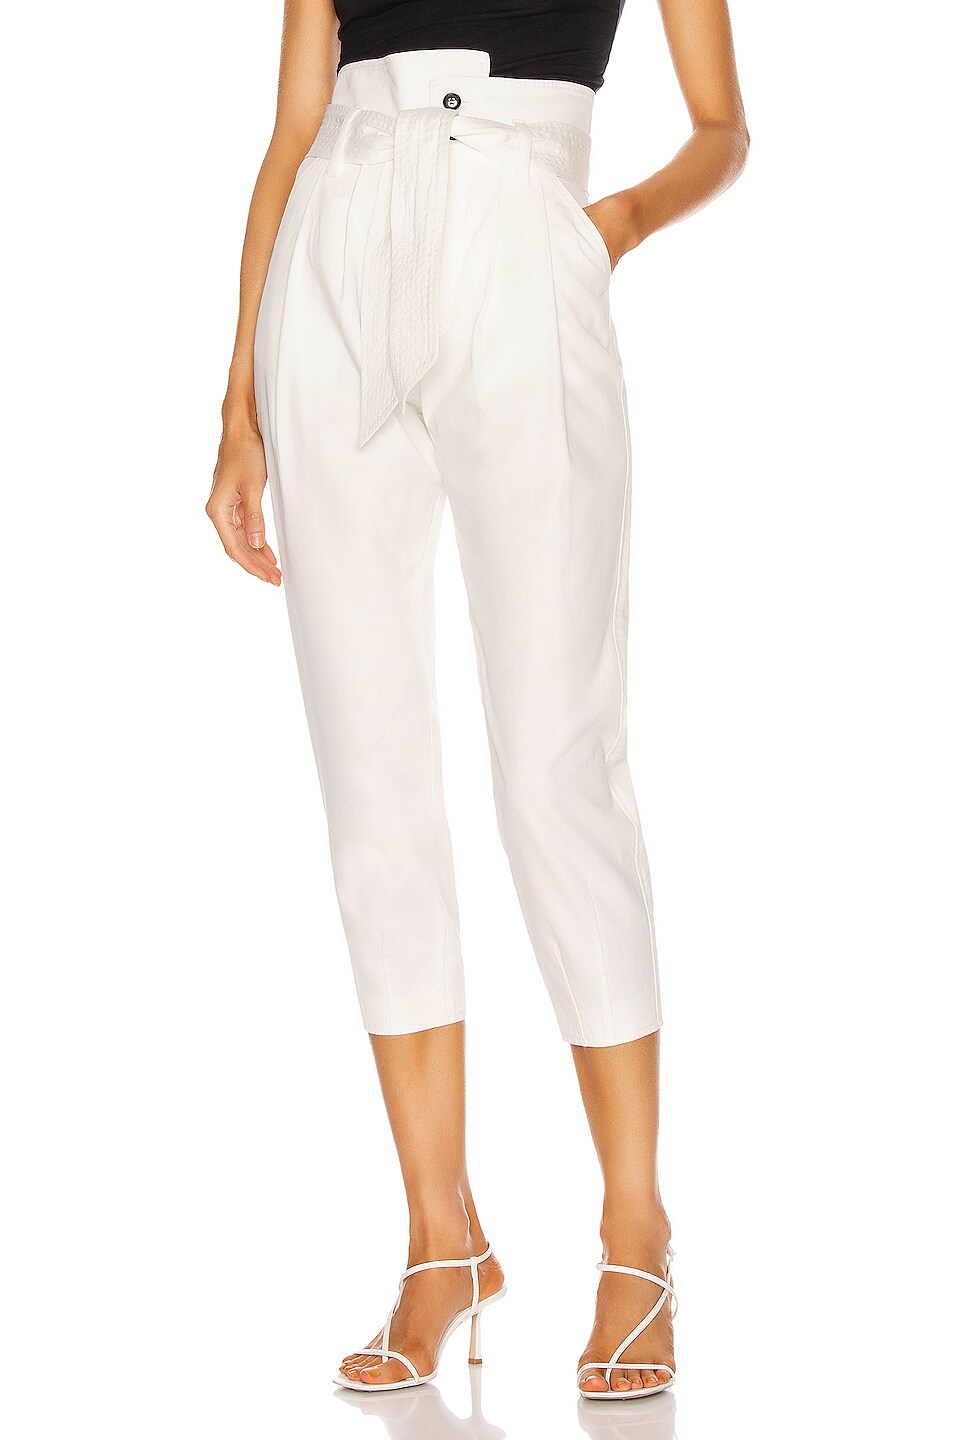 Image 1 of Marissa Webb Piper Pegged Leg Pant in Soft White